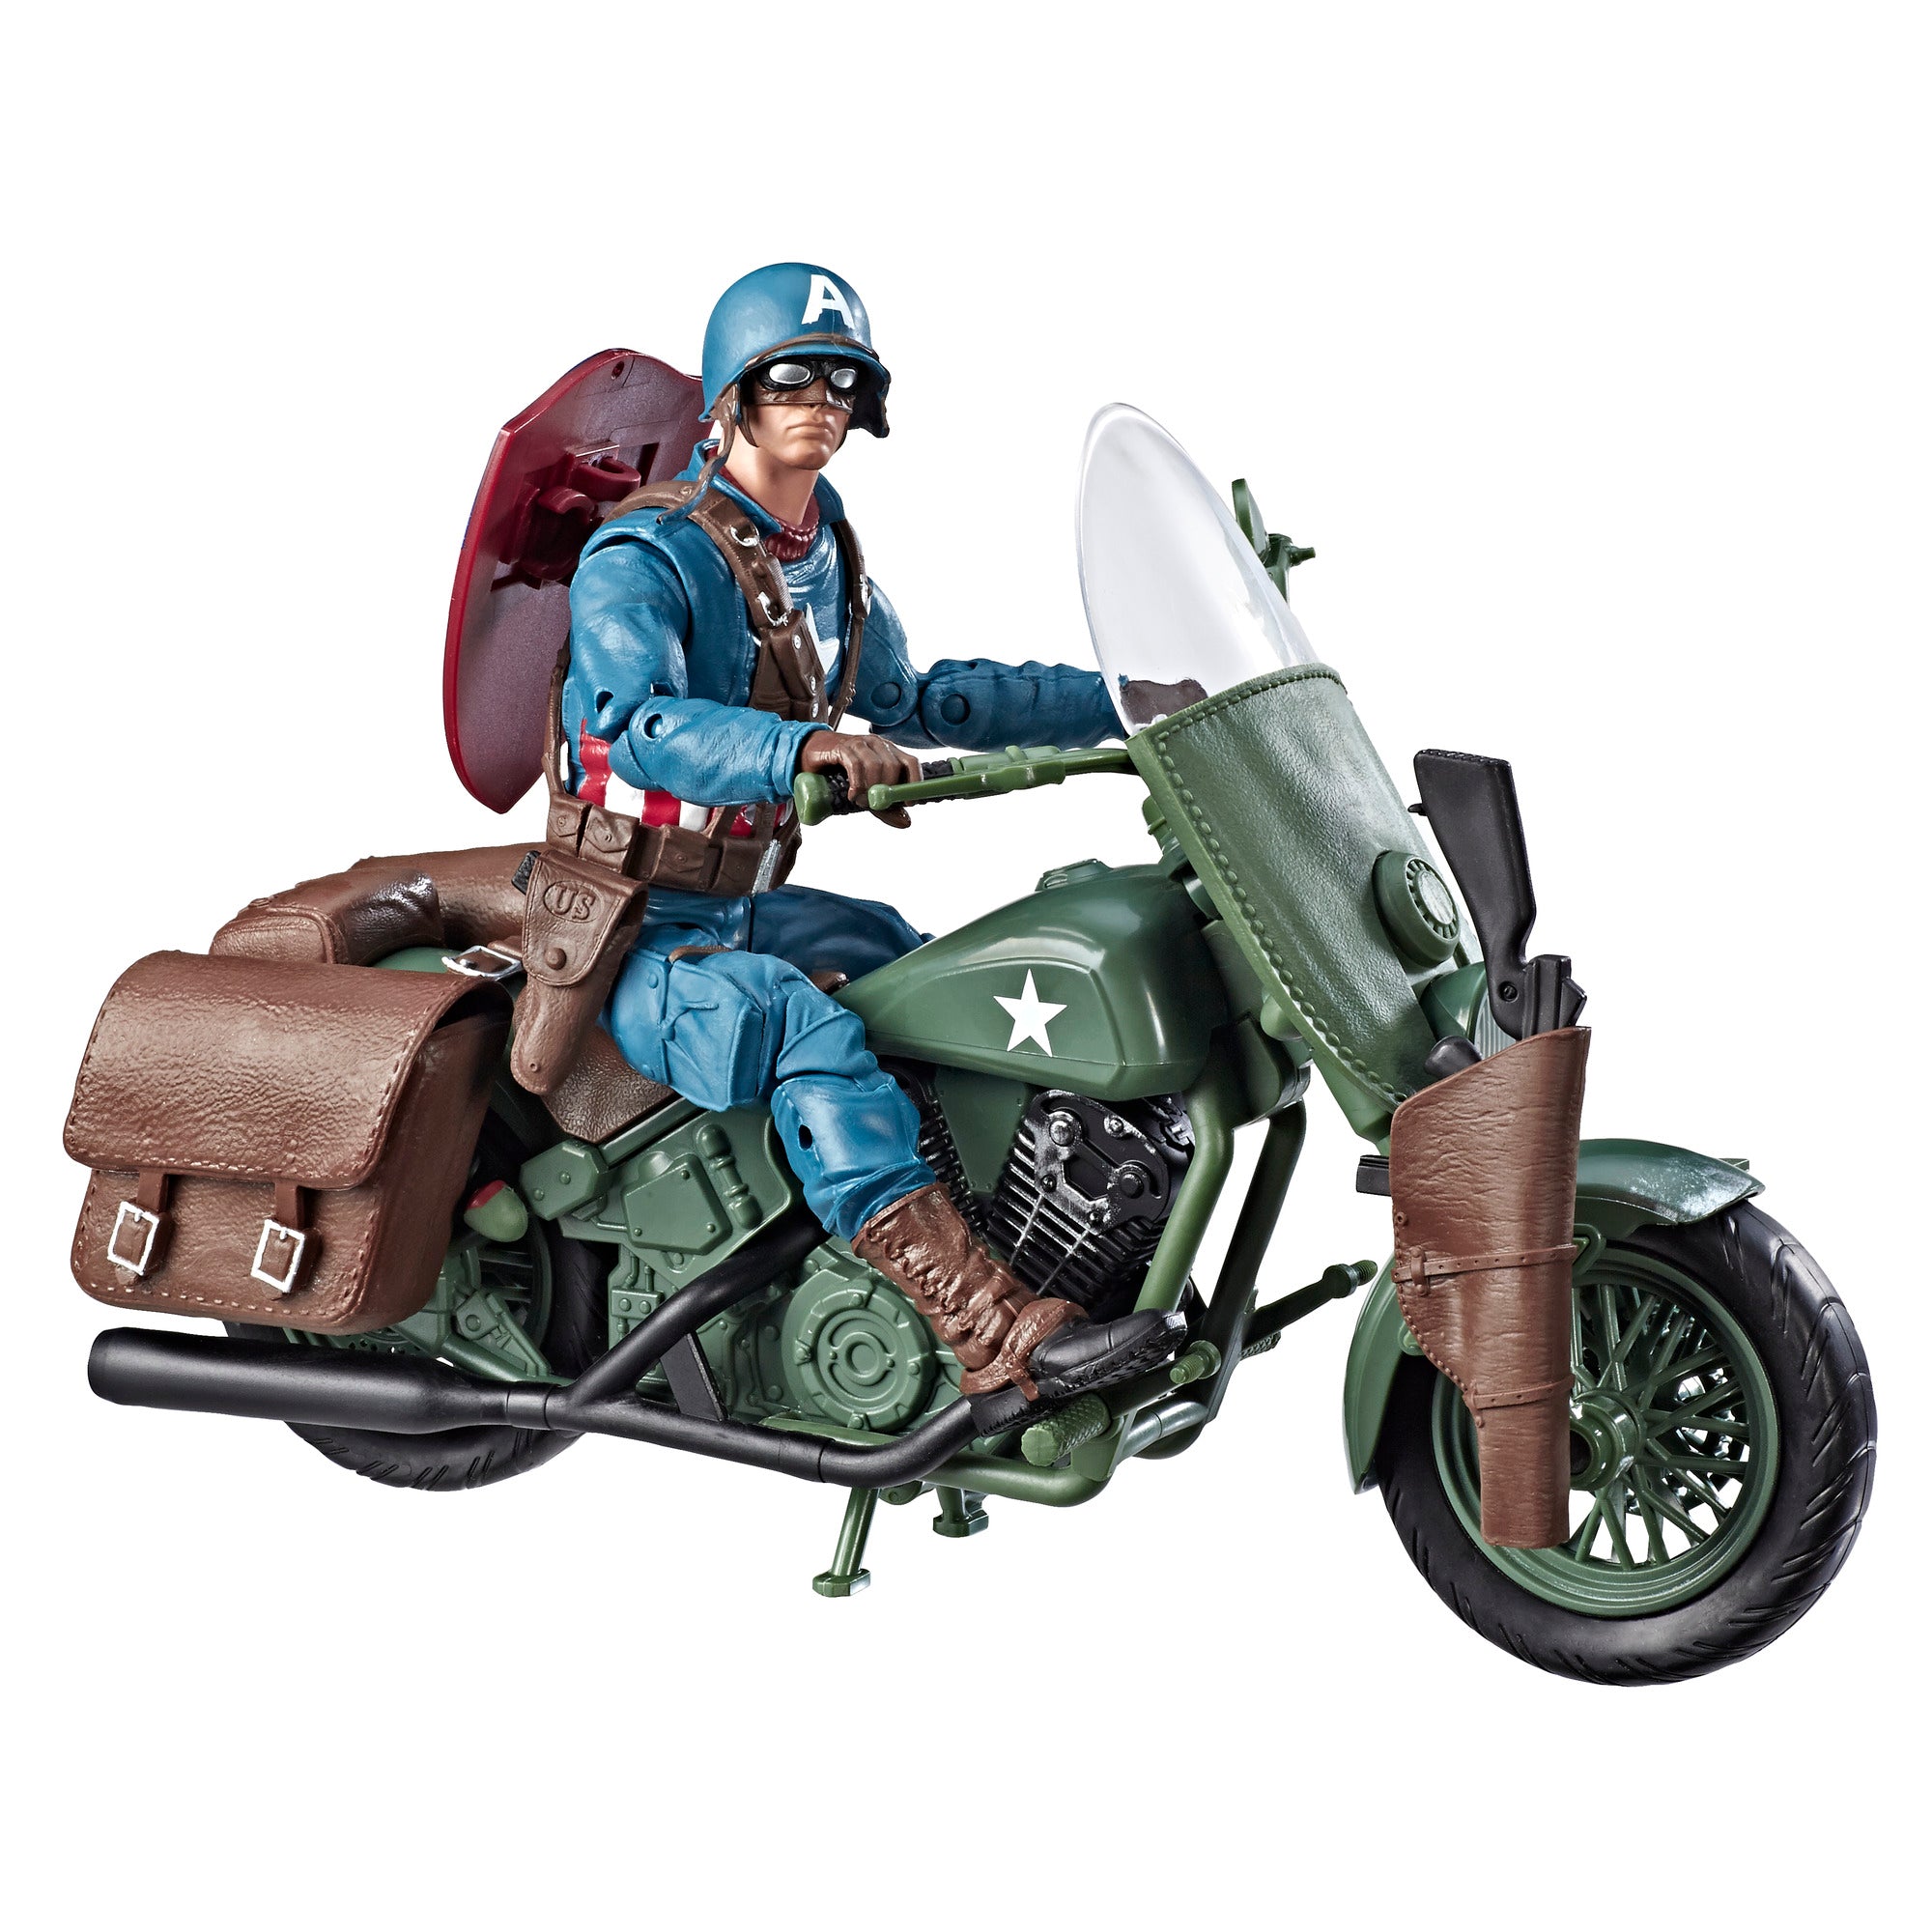 Marvel Legends Series Captain America Figure with Motorcycle – Hasbro Pulse